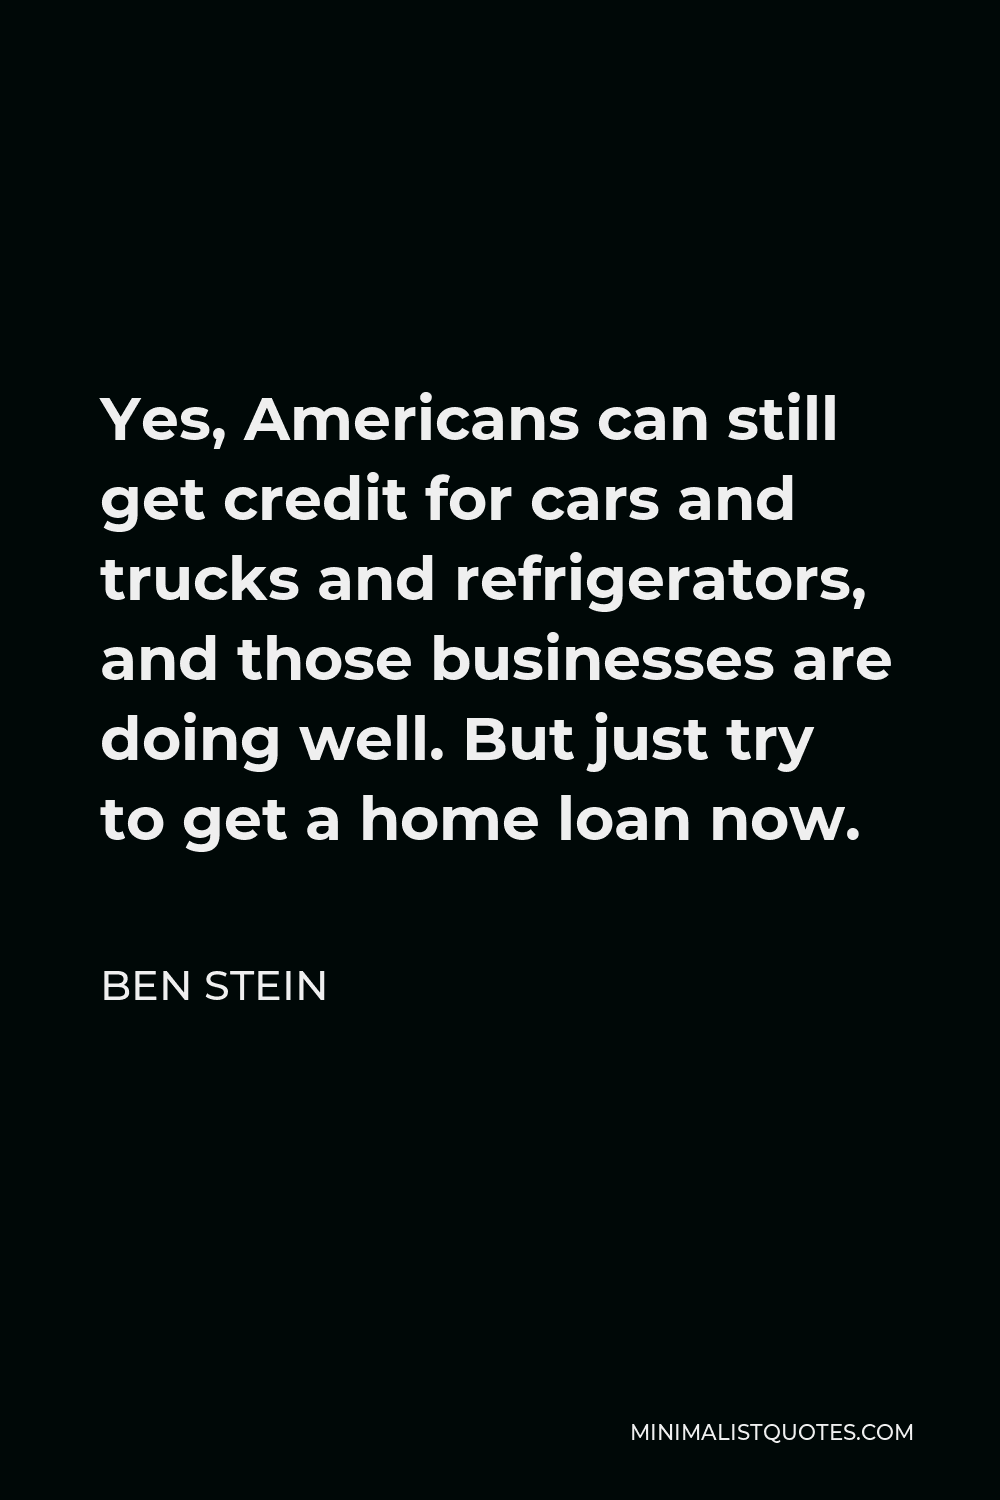 Ben Stein Quote - Yes, Americans can still get credit for cars and trucks and refrigerators, and those businesses are doing well. But just try to get a home loan now.